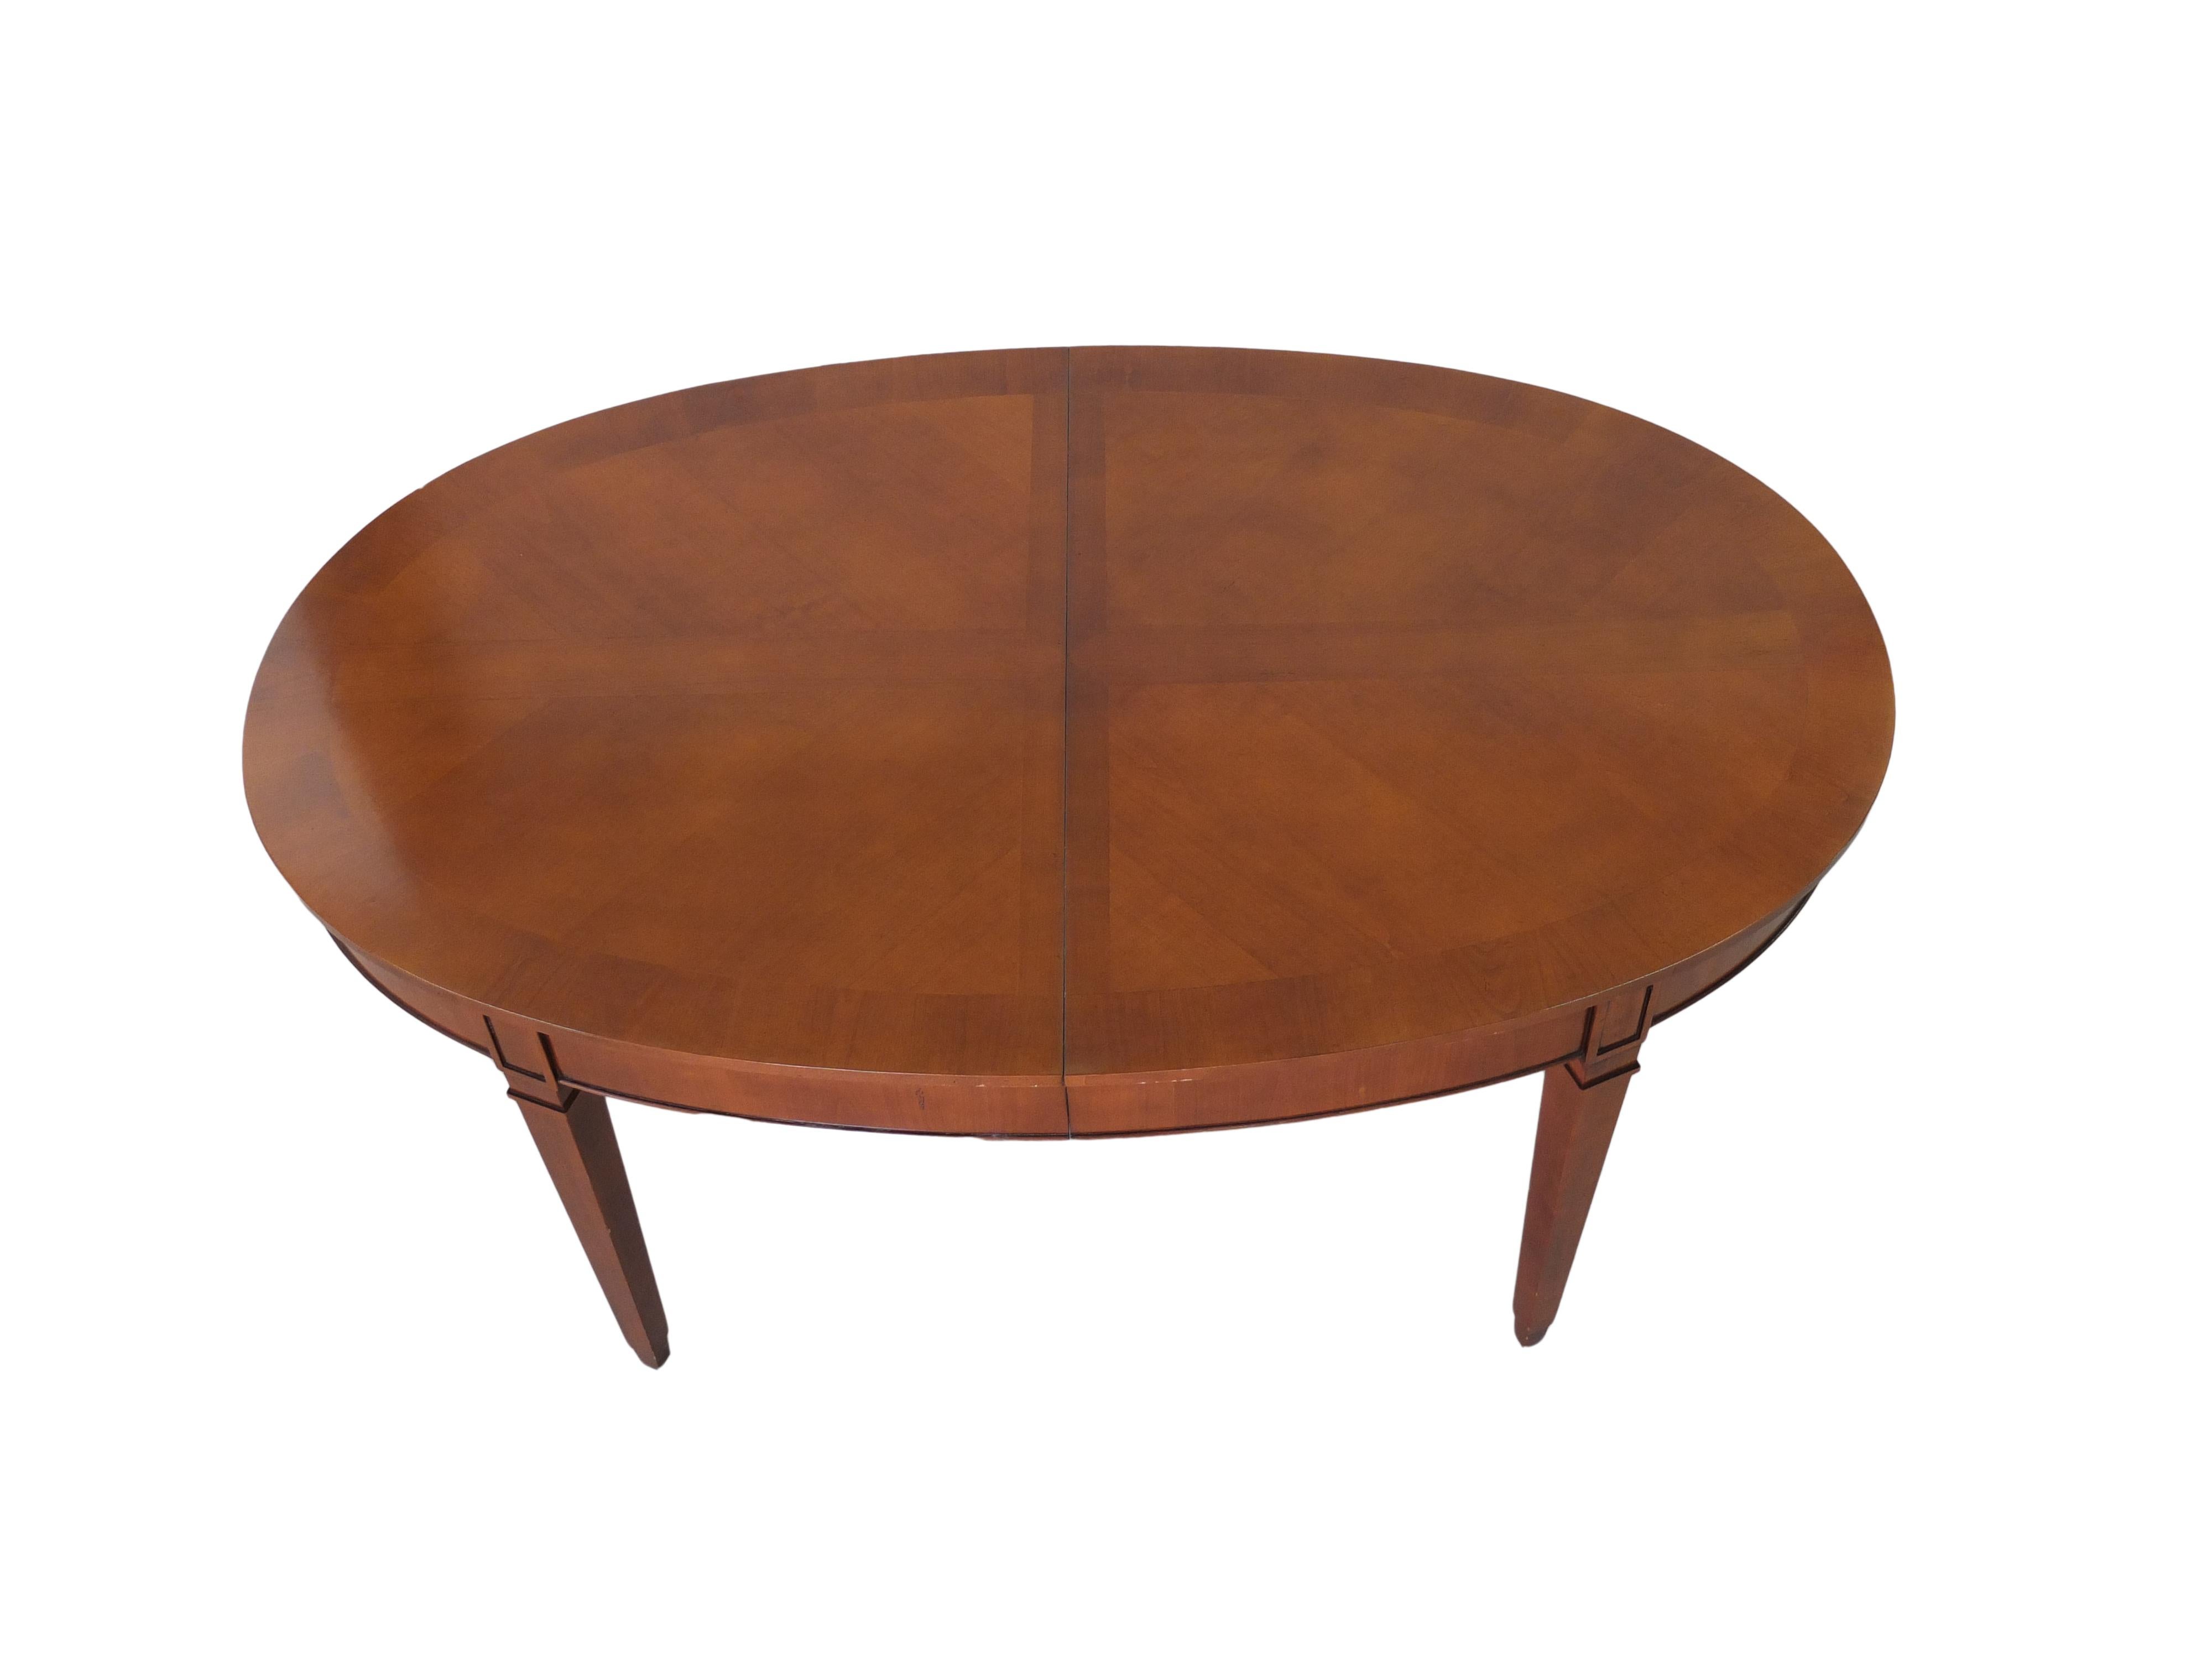 Contemporary oval extendable table in Direttorio style, made of cherrywood.
Precious inlay on the top.
Dimension: L 180 W 110 H 78 cm
dimension open: L 330 W 110 H 78.

      